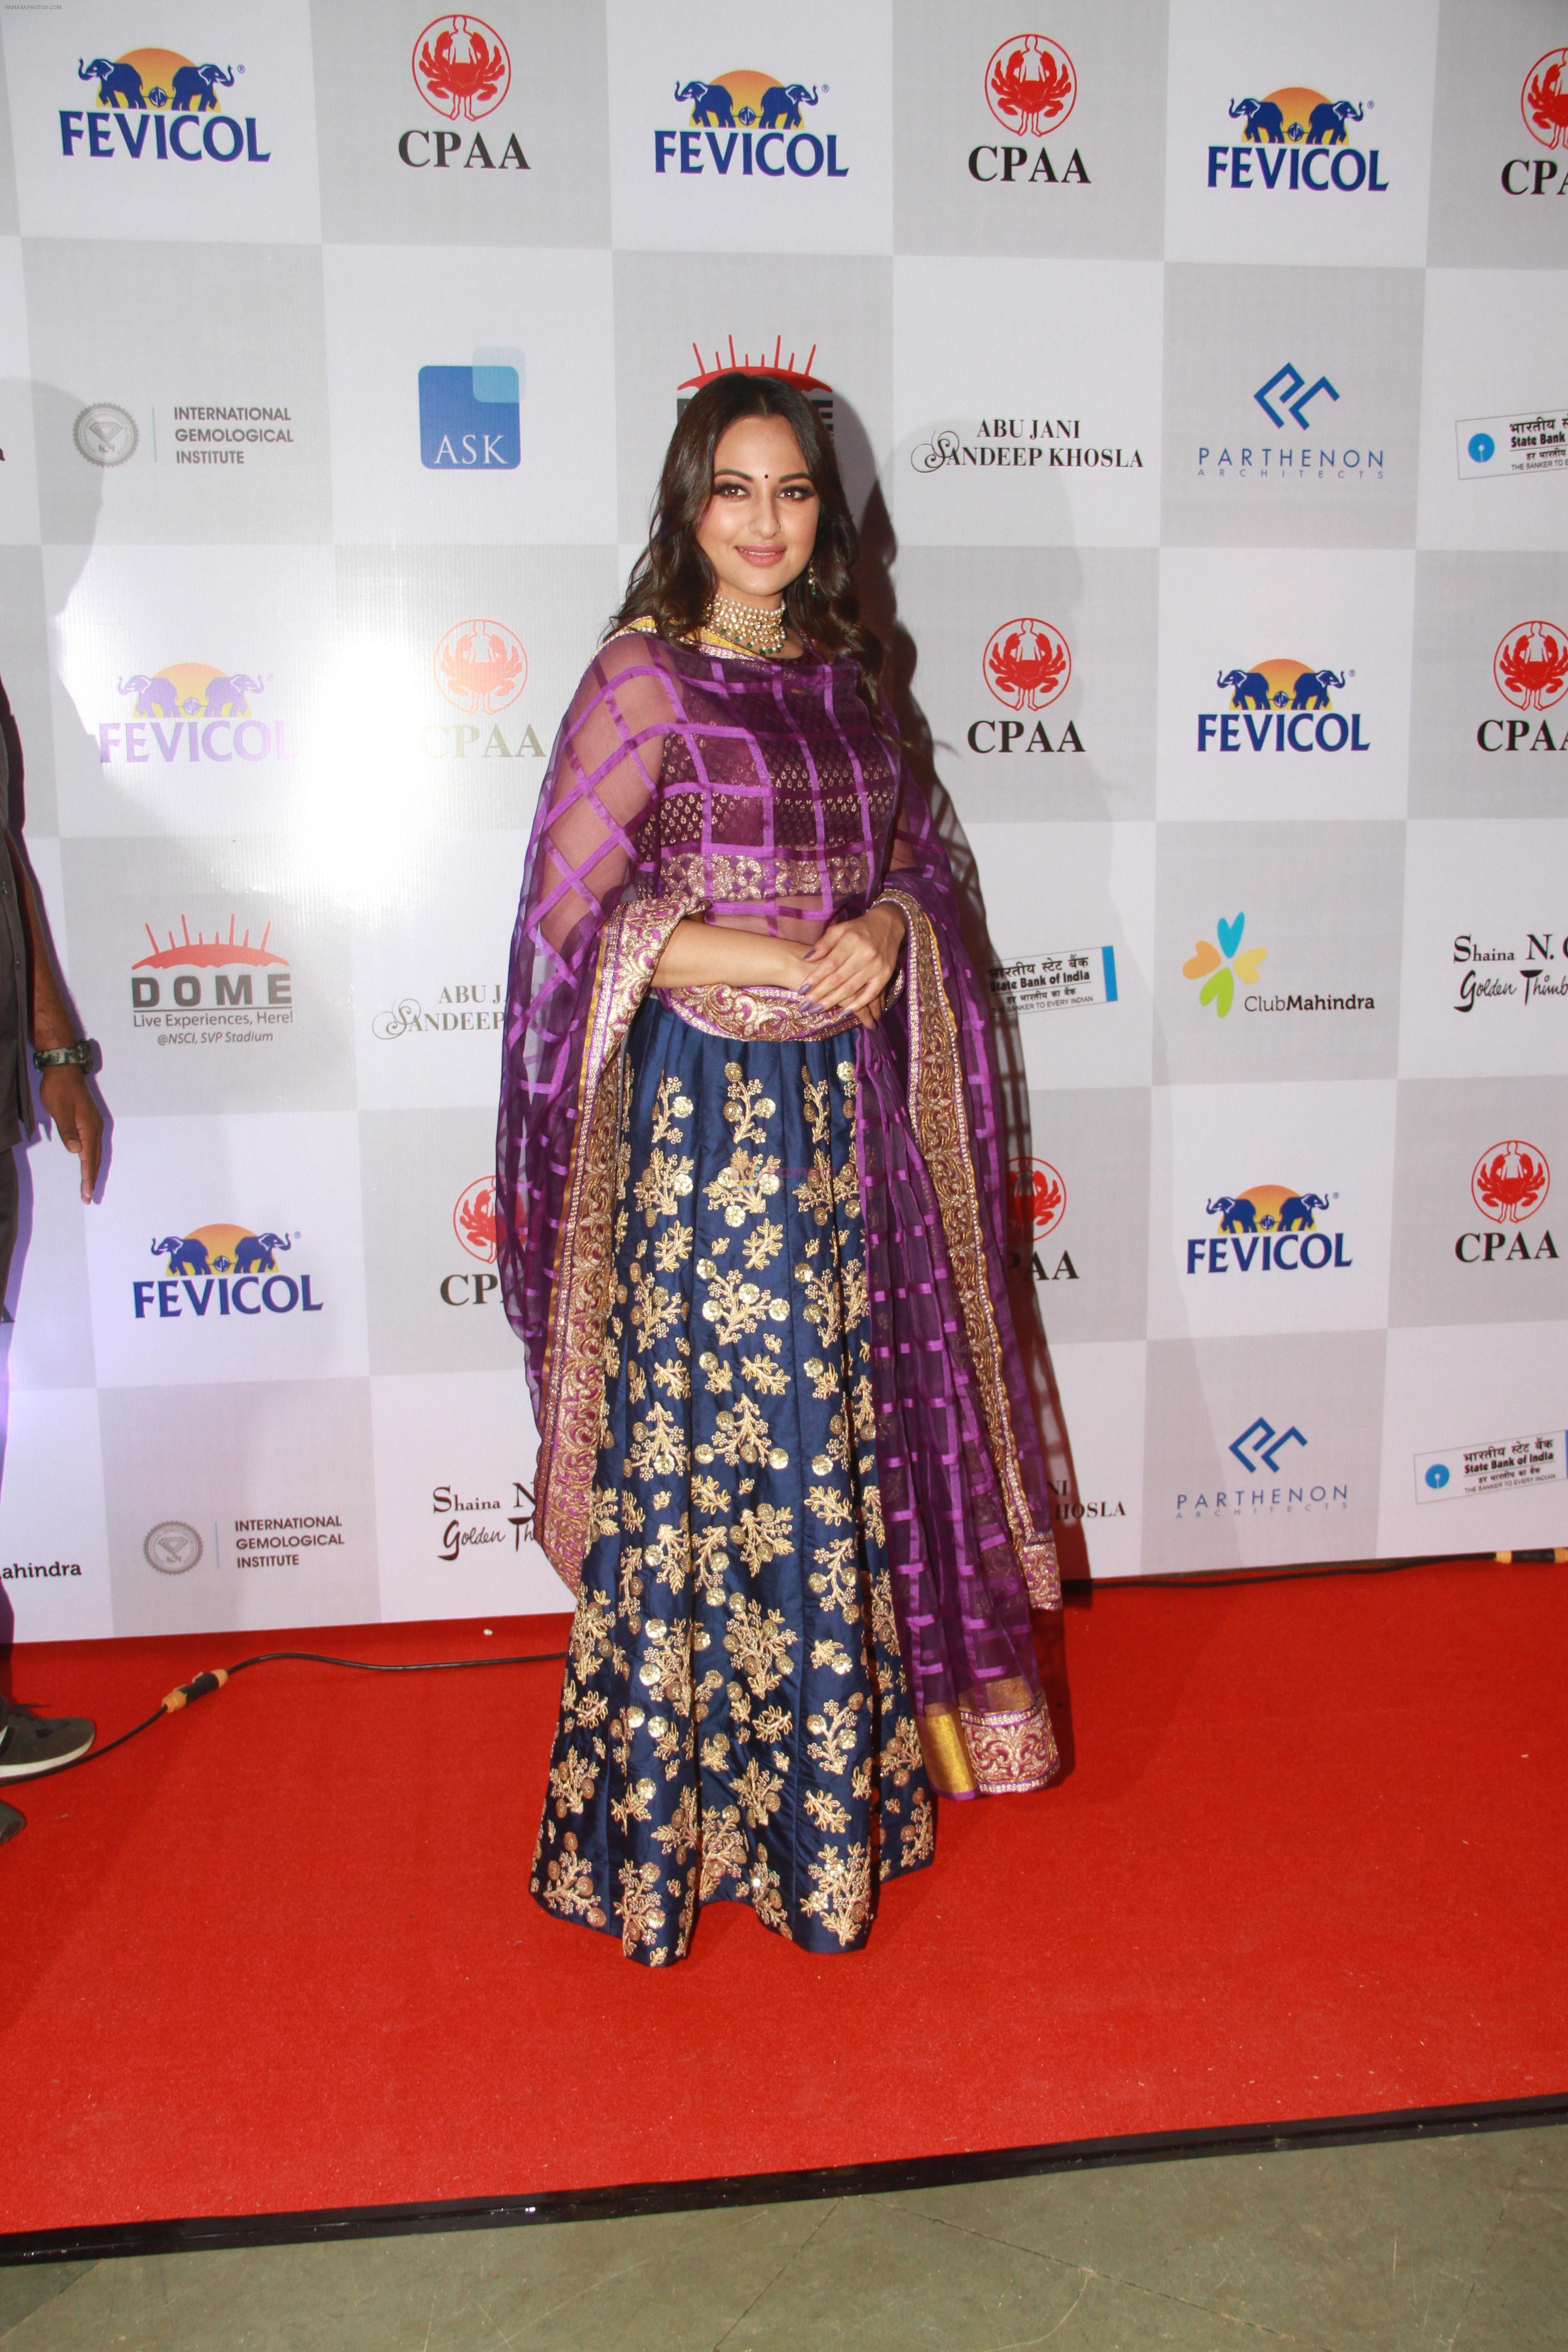 Sonakshi Sinha at Caring With Style Abu Jani Sandeep Khosla & Shaina NC Fashion Show To Raise Funds For Cancer Patient Aid Association